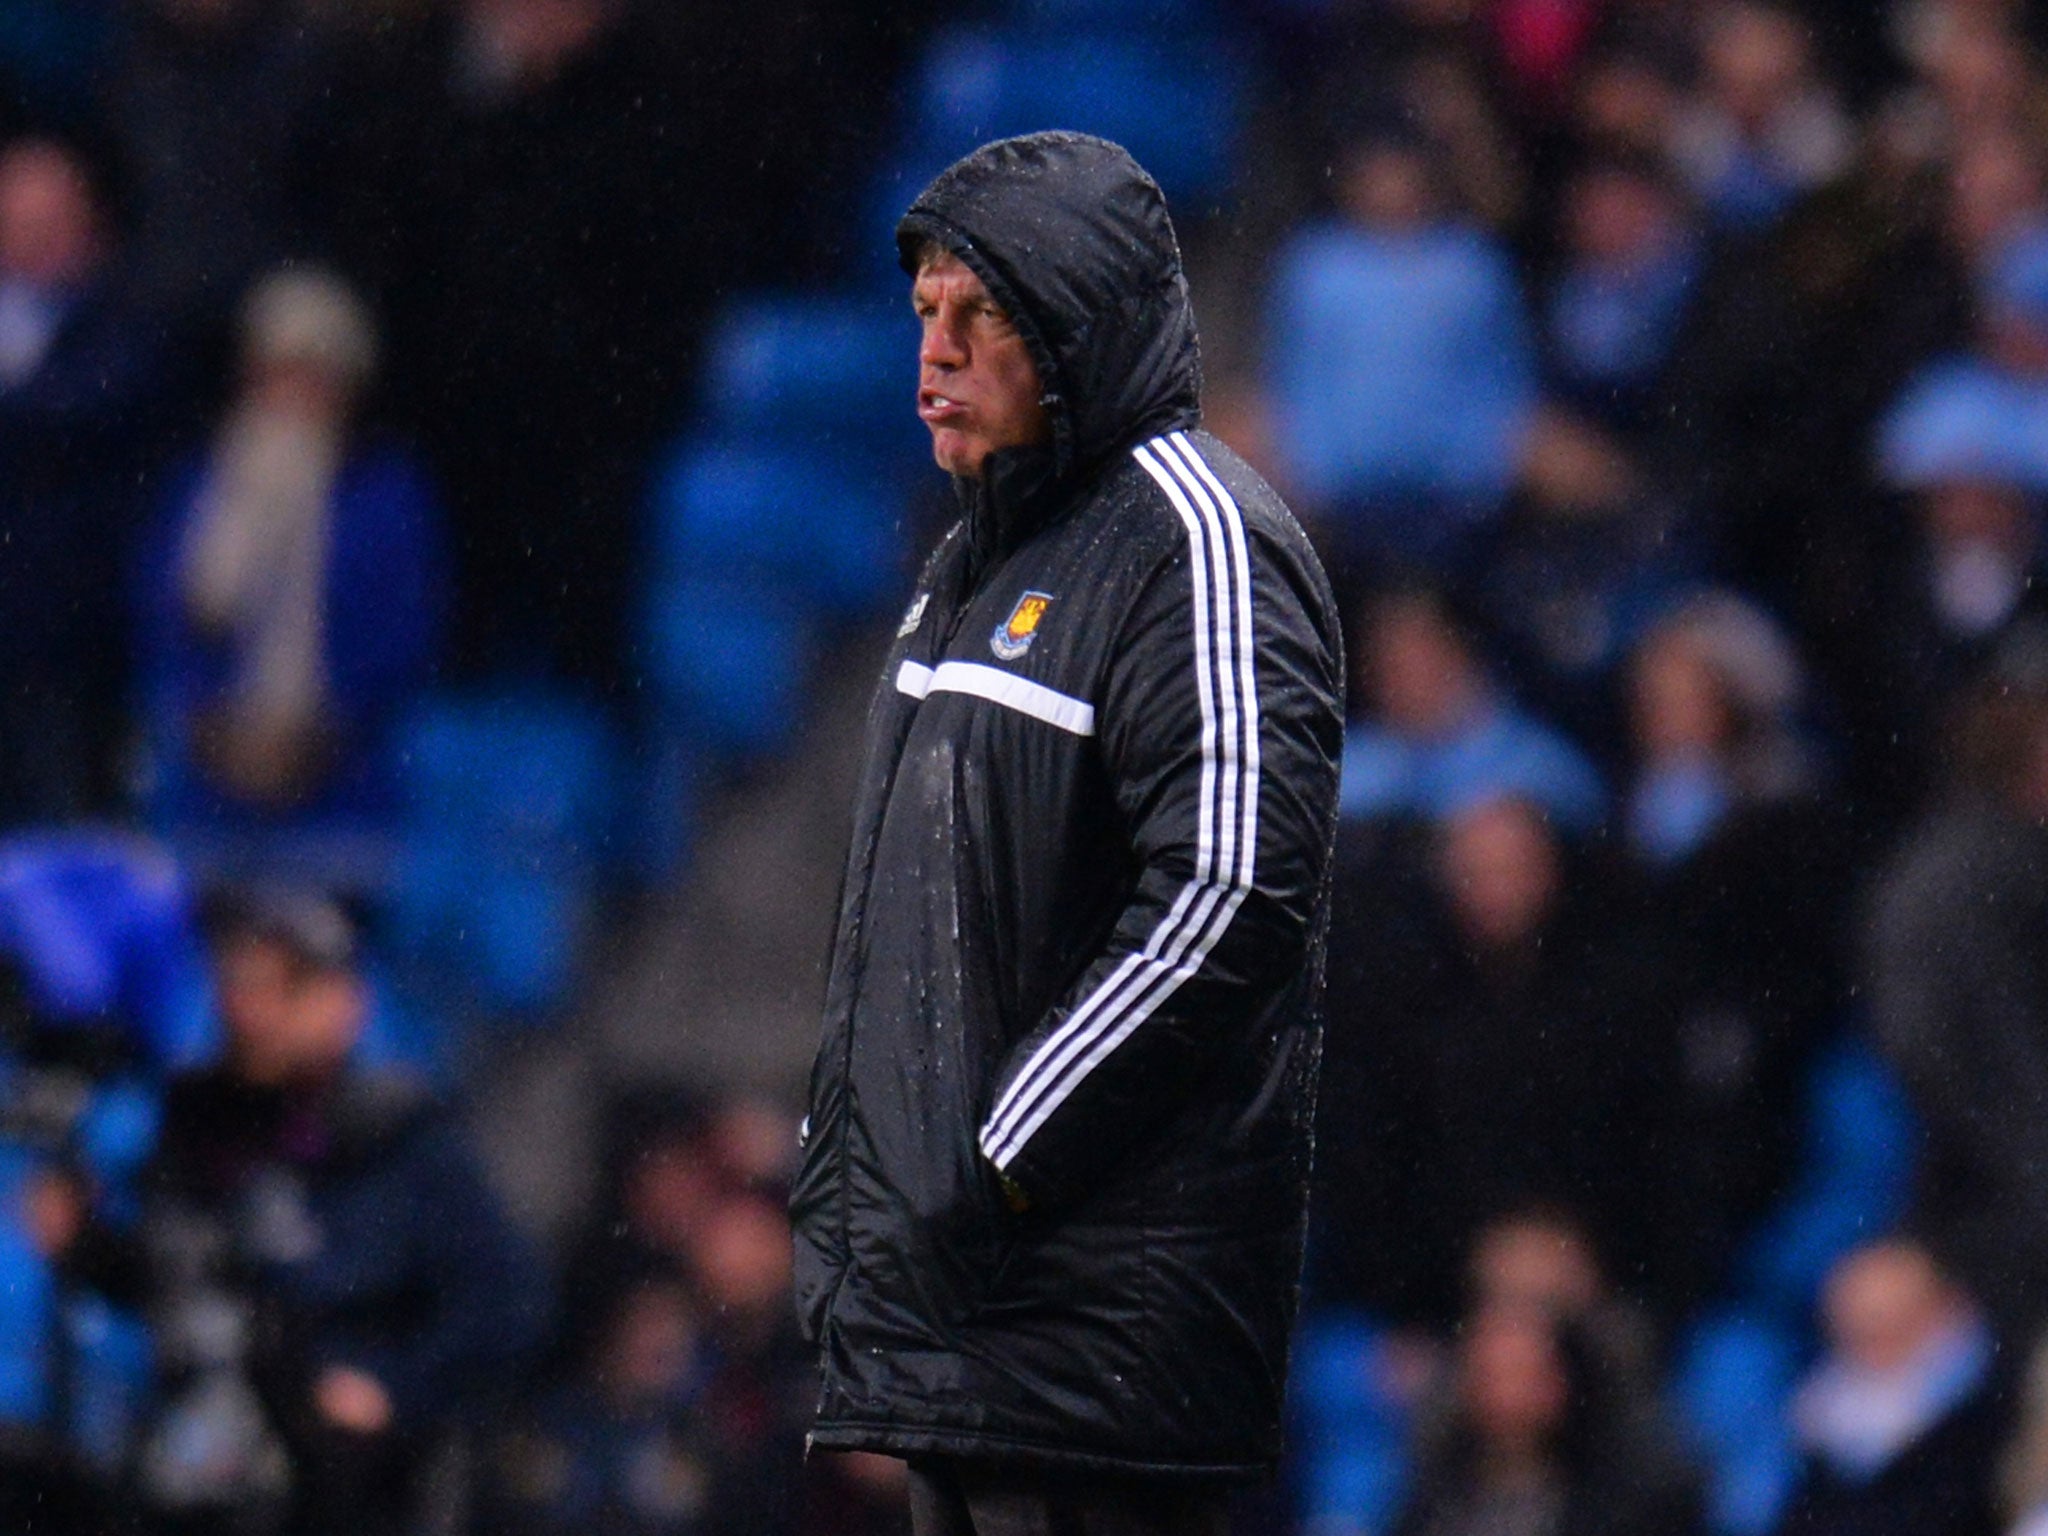 Sam Allardyce looks less than impressed as his West Ham side succumbed to a 6-0 defeat to Manchester City